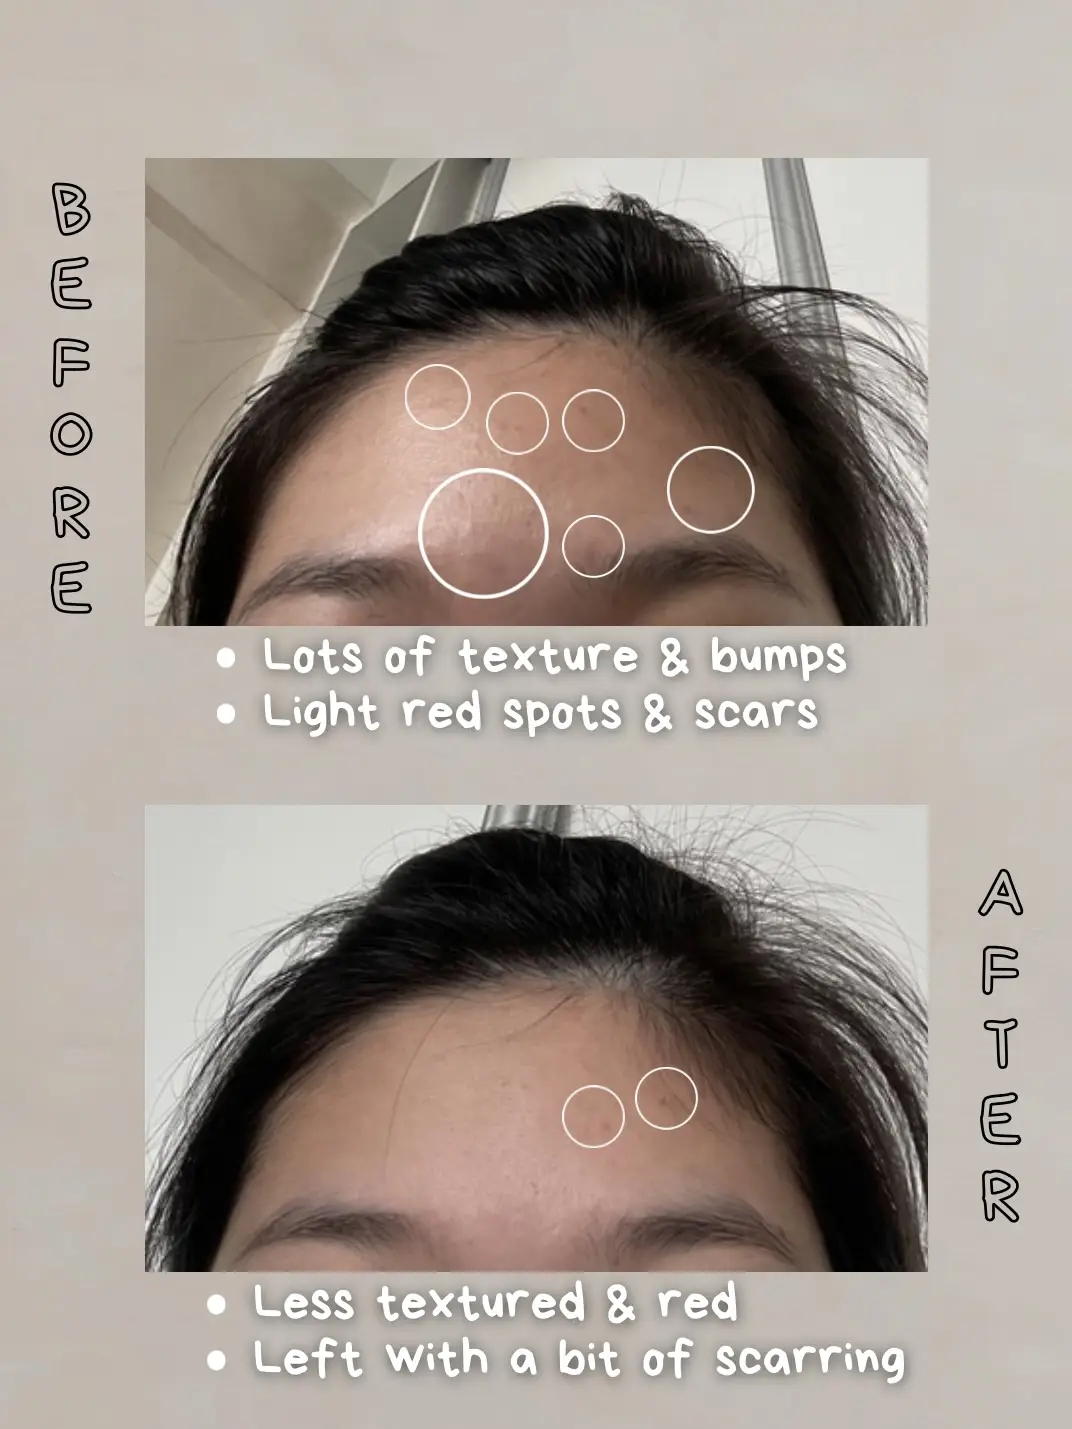 Reduce texture & acne with this!!'s images(2)